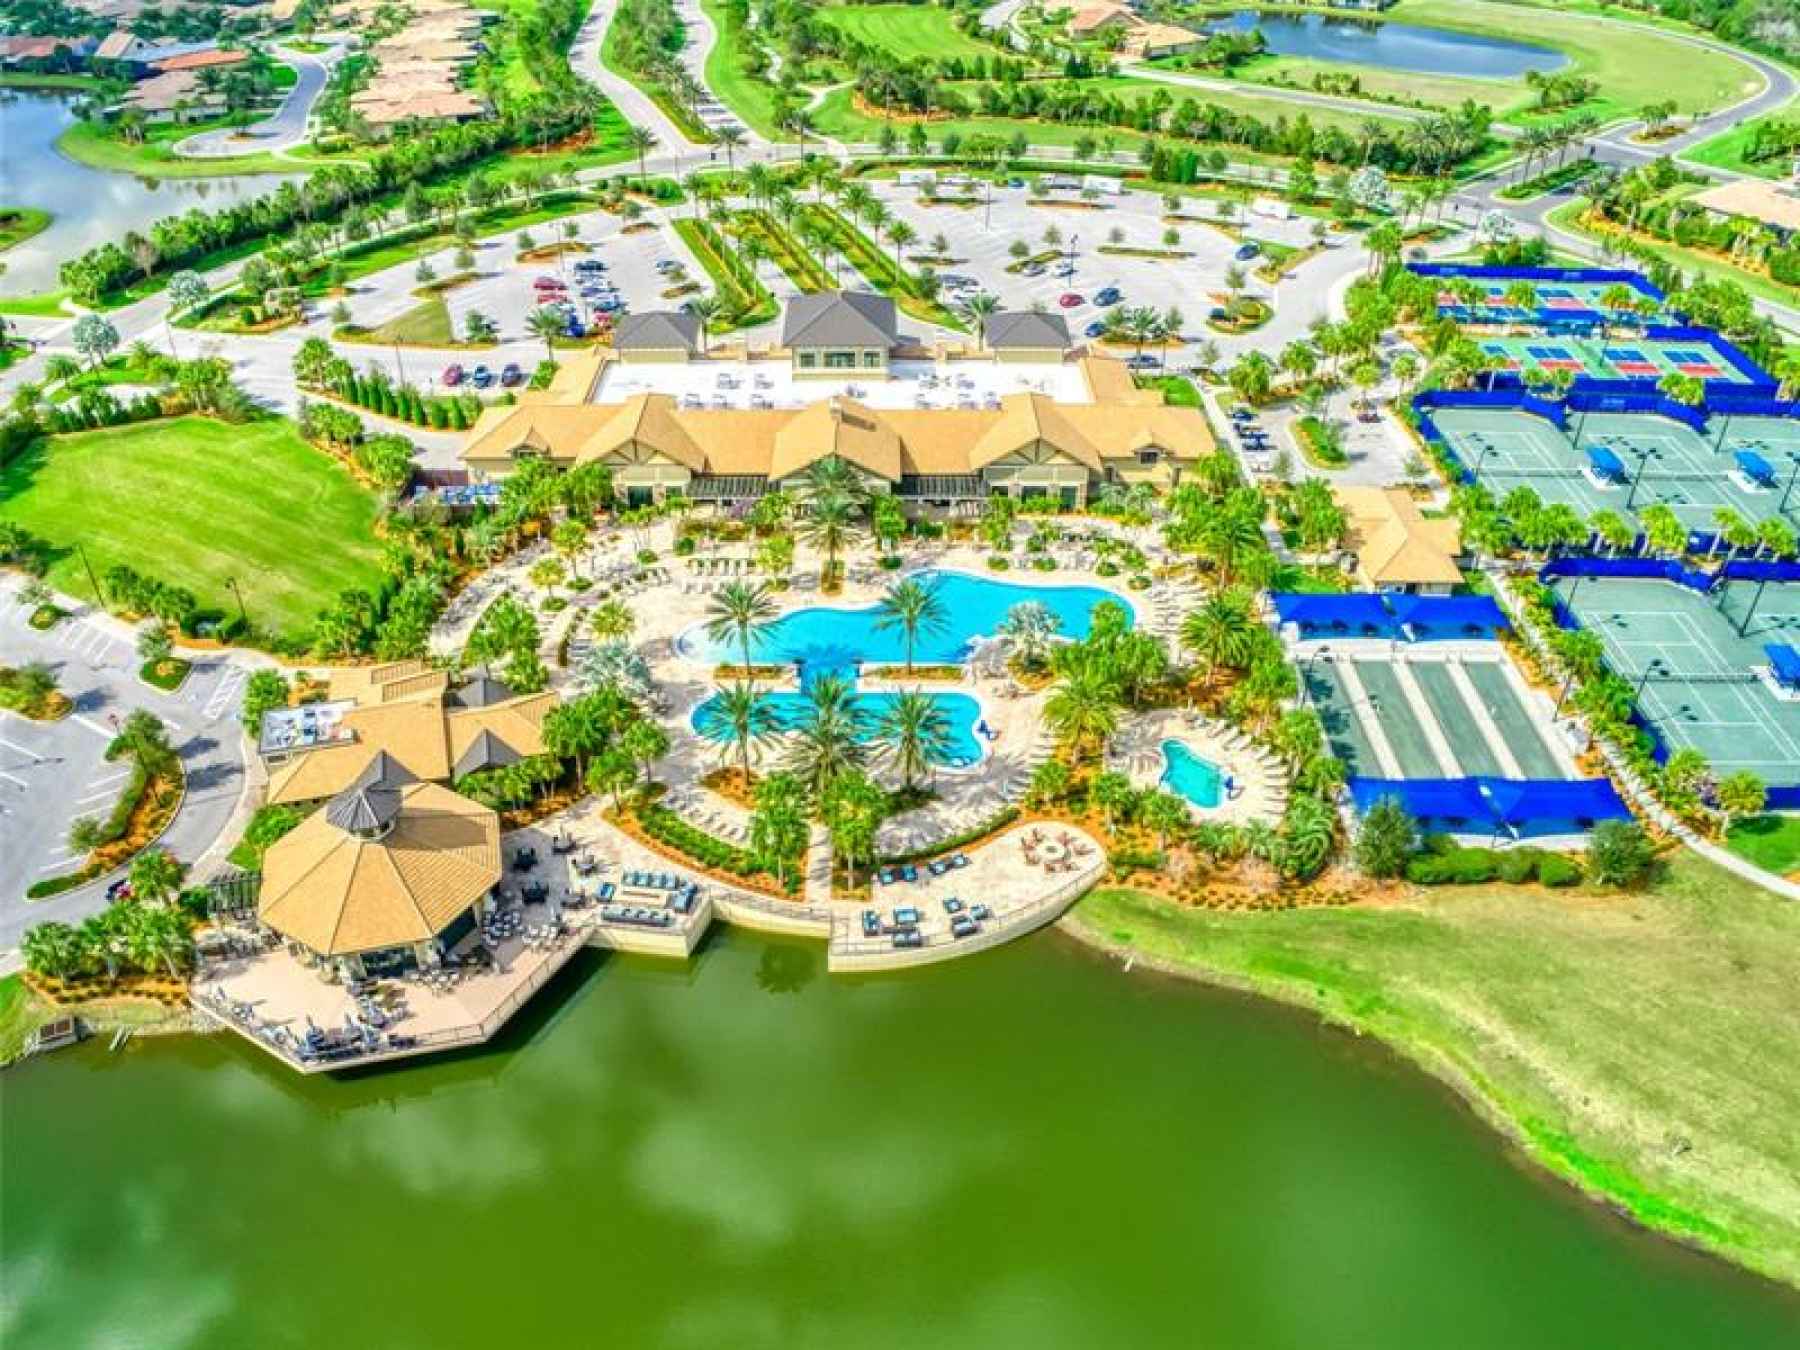 Del Webb Amenity Complex offers it all - resort pools/spa, tennis, pickle ball, bocce, dining and th